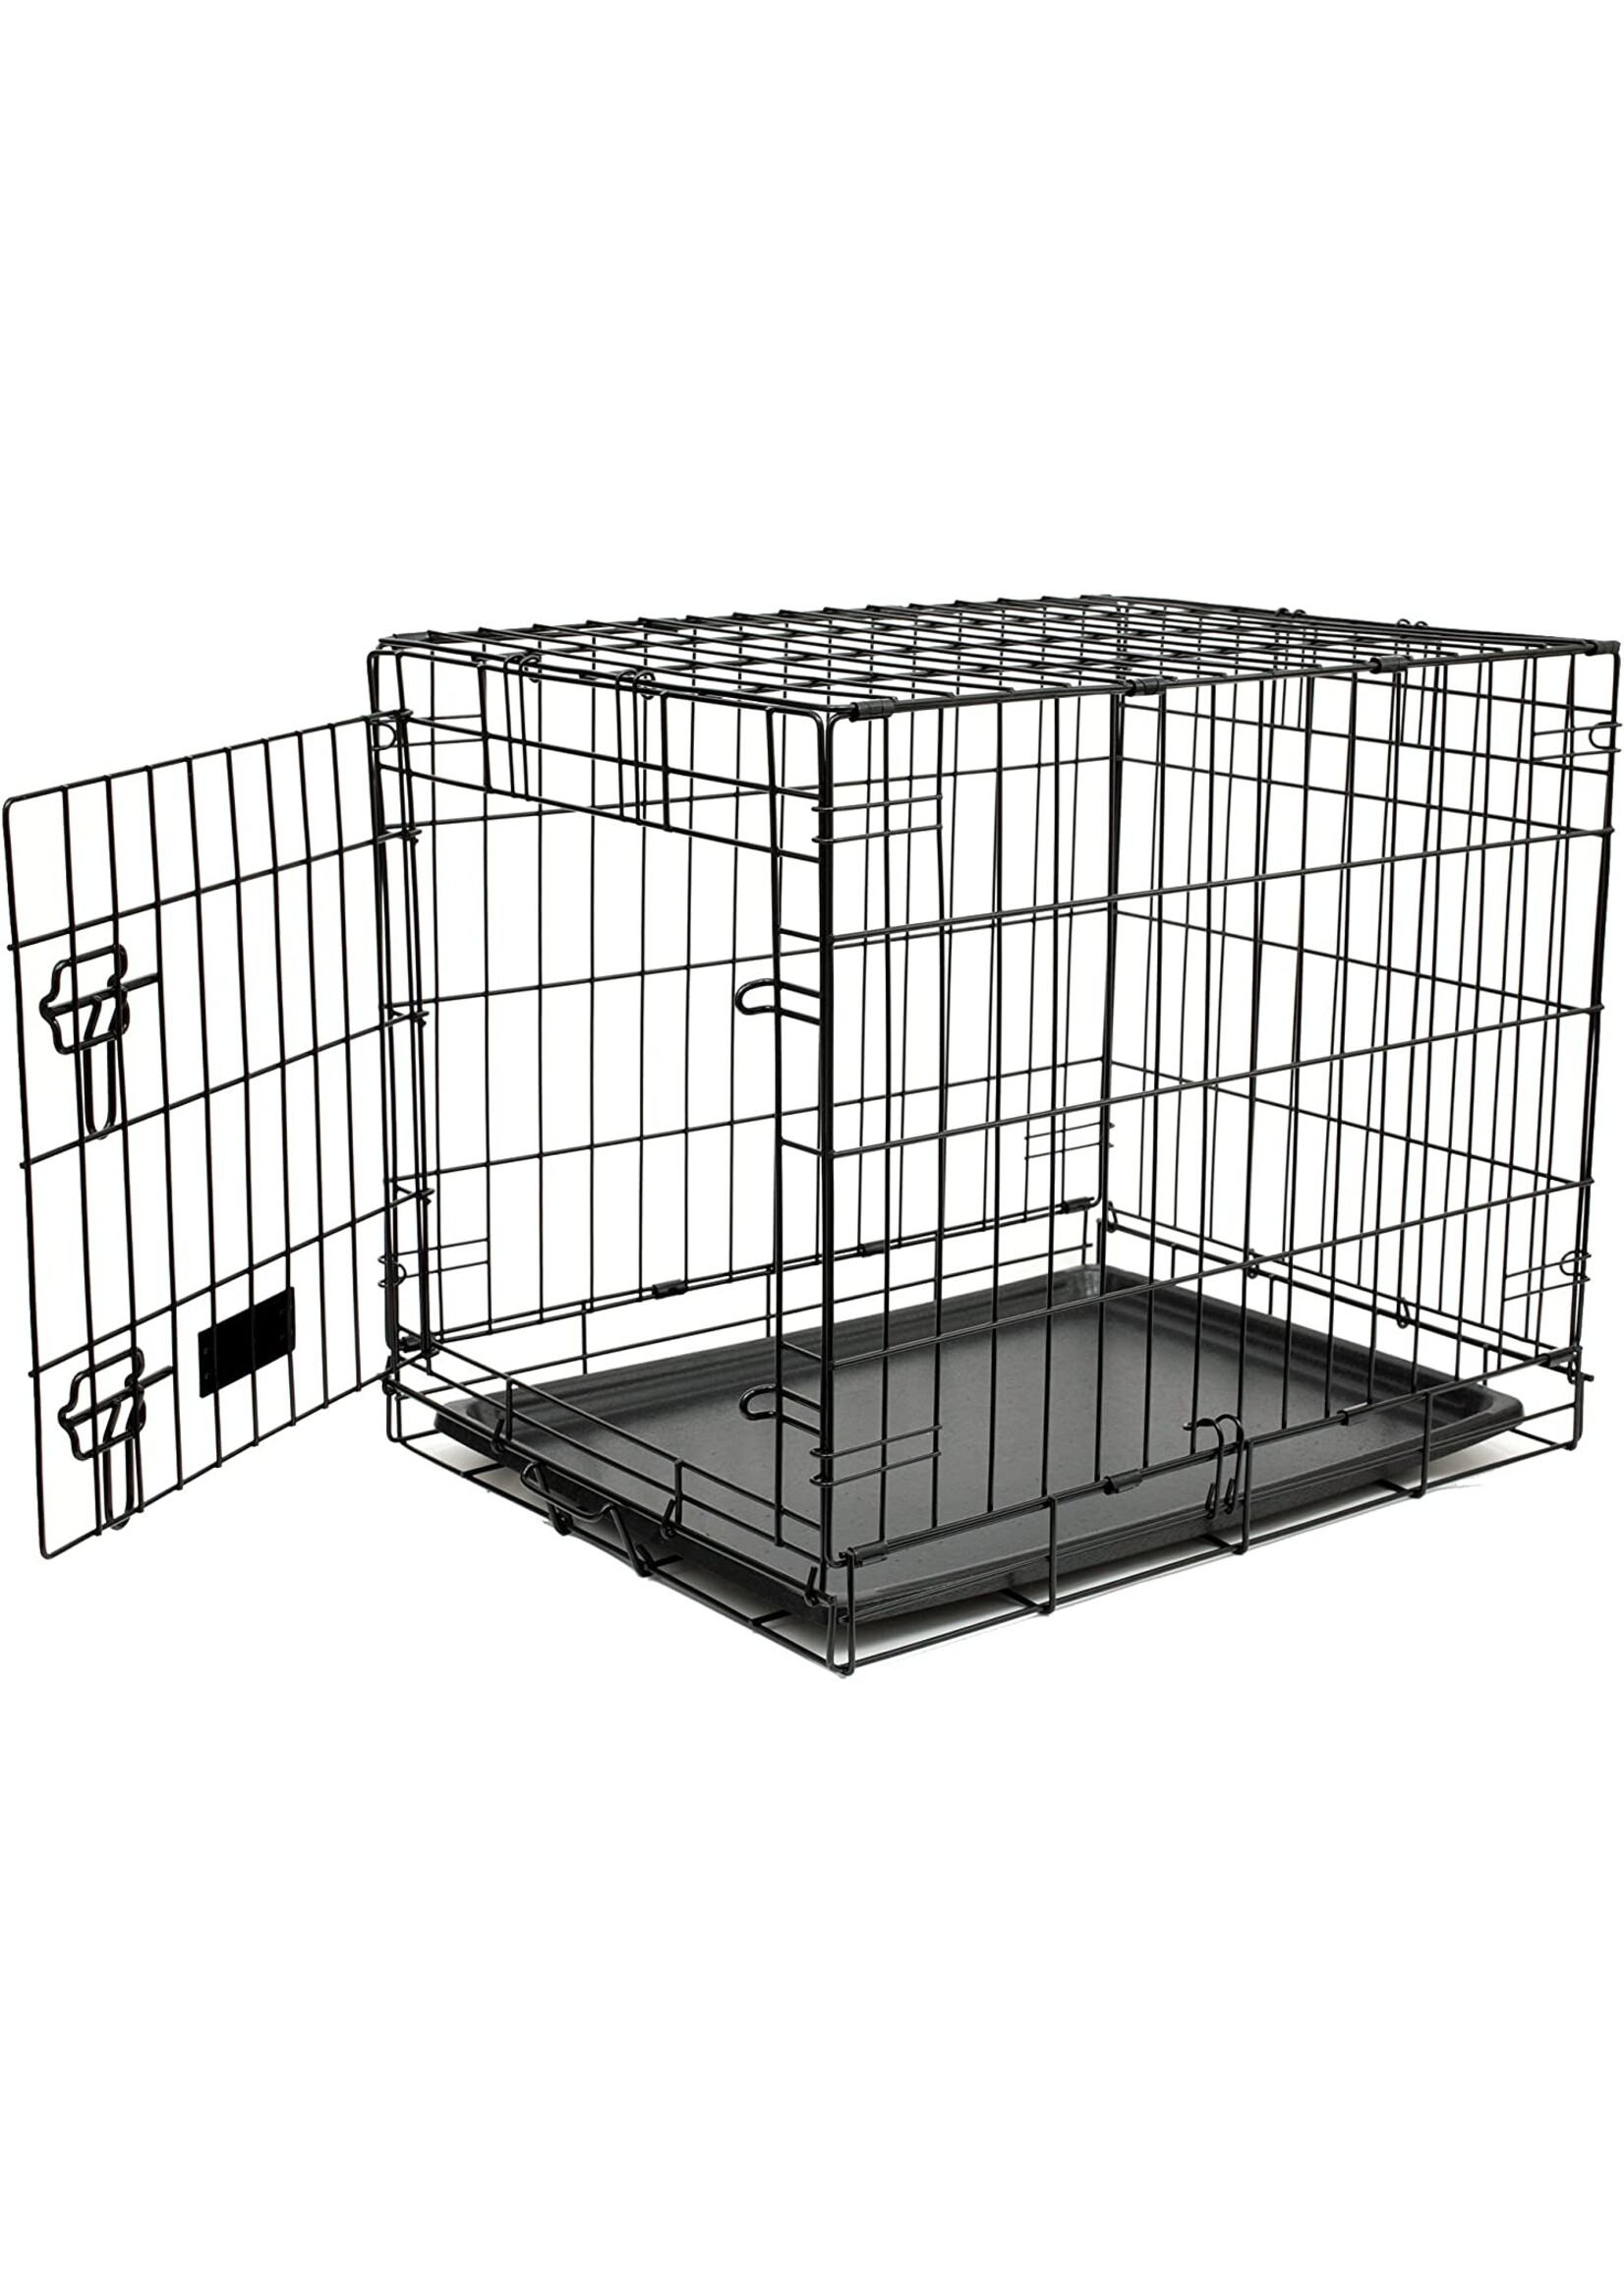 Precision Pet Products Precision BASICrate 7000 54 x 33 x 42"